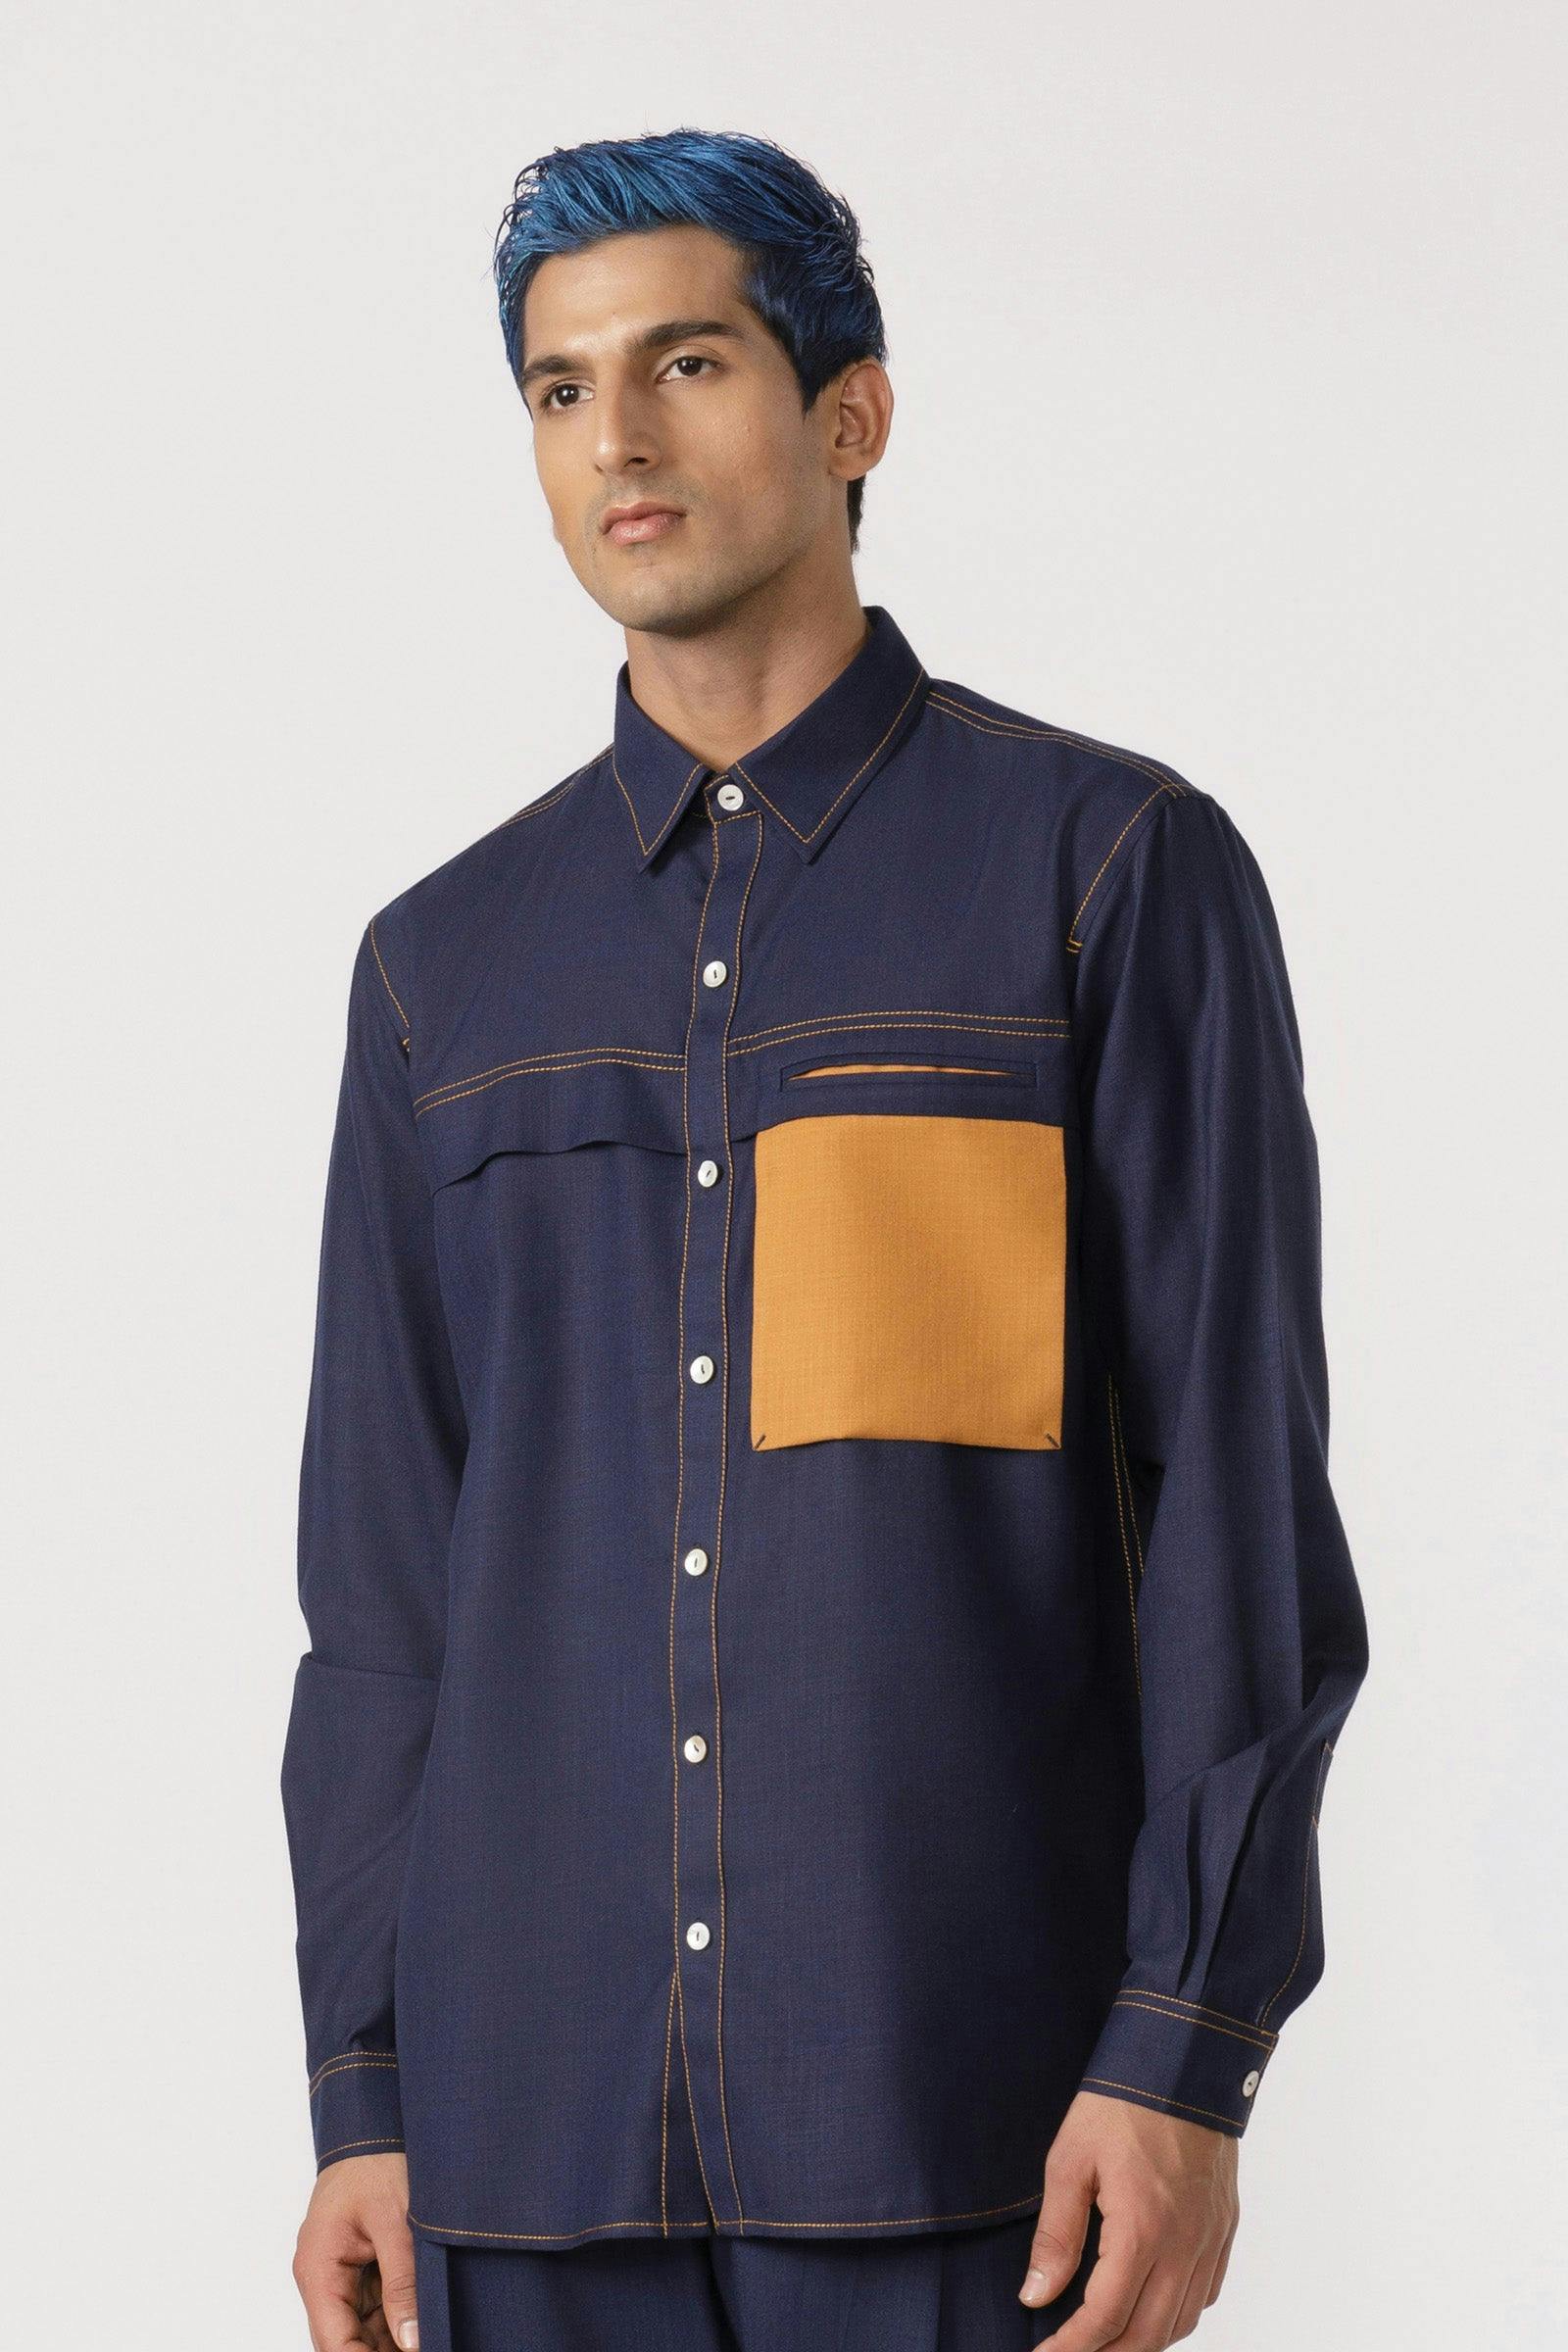 Contrast patch pocket shirt, a product by Line Outline